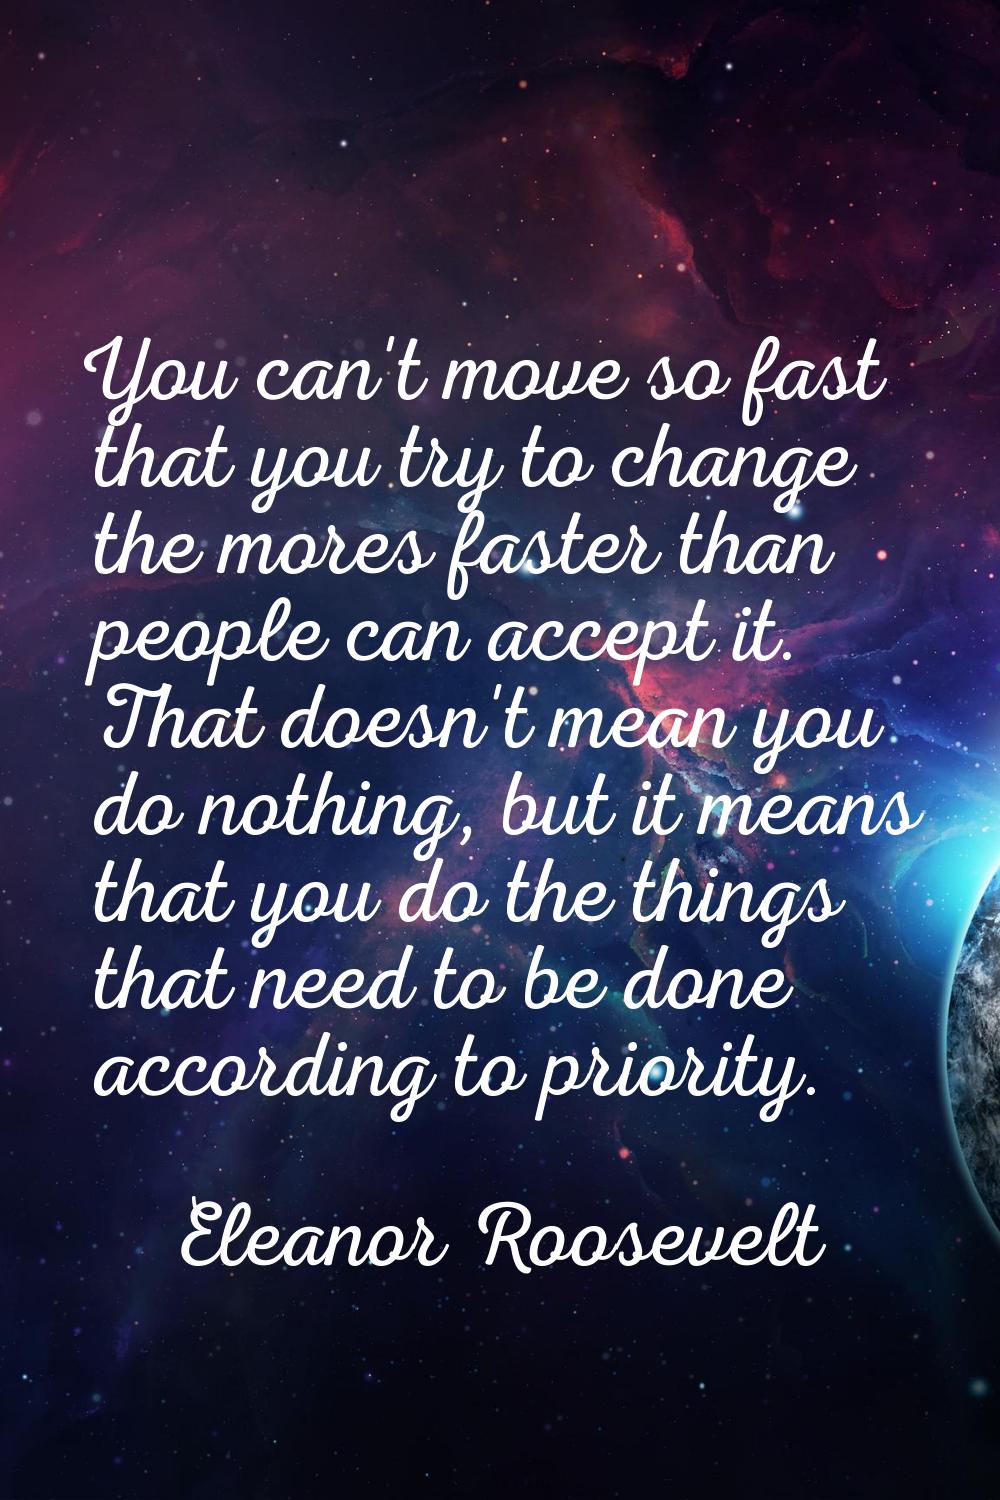 You can't move so fast that you try to change the mores faster than people can accept it. That does